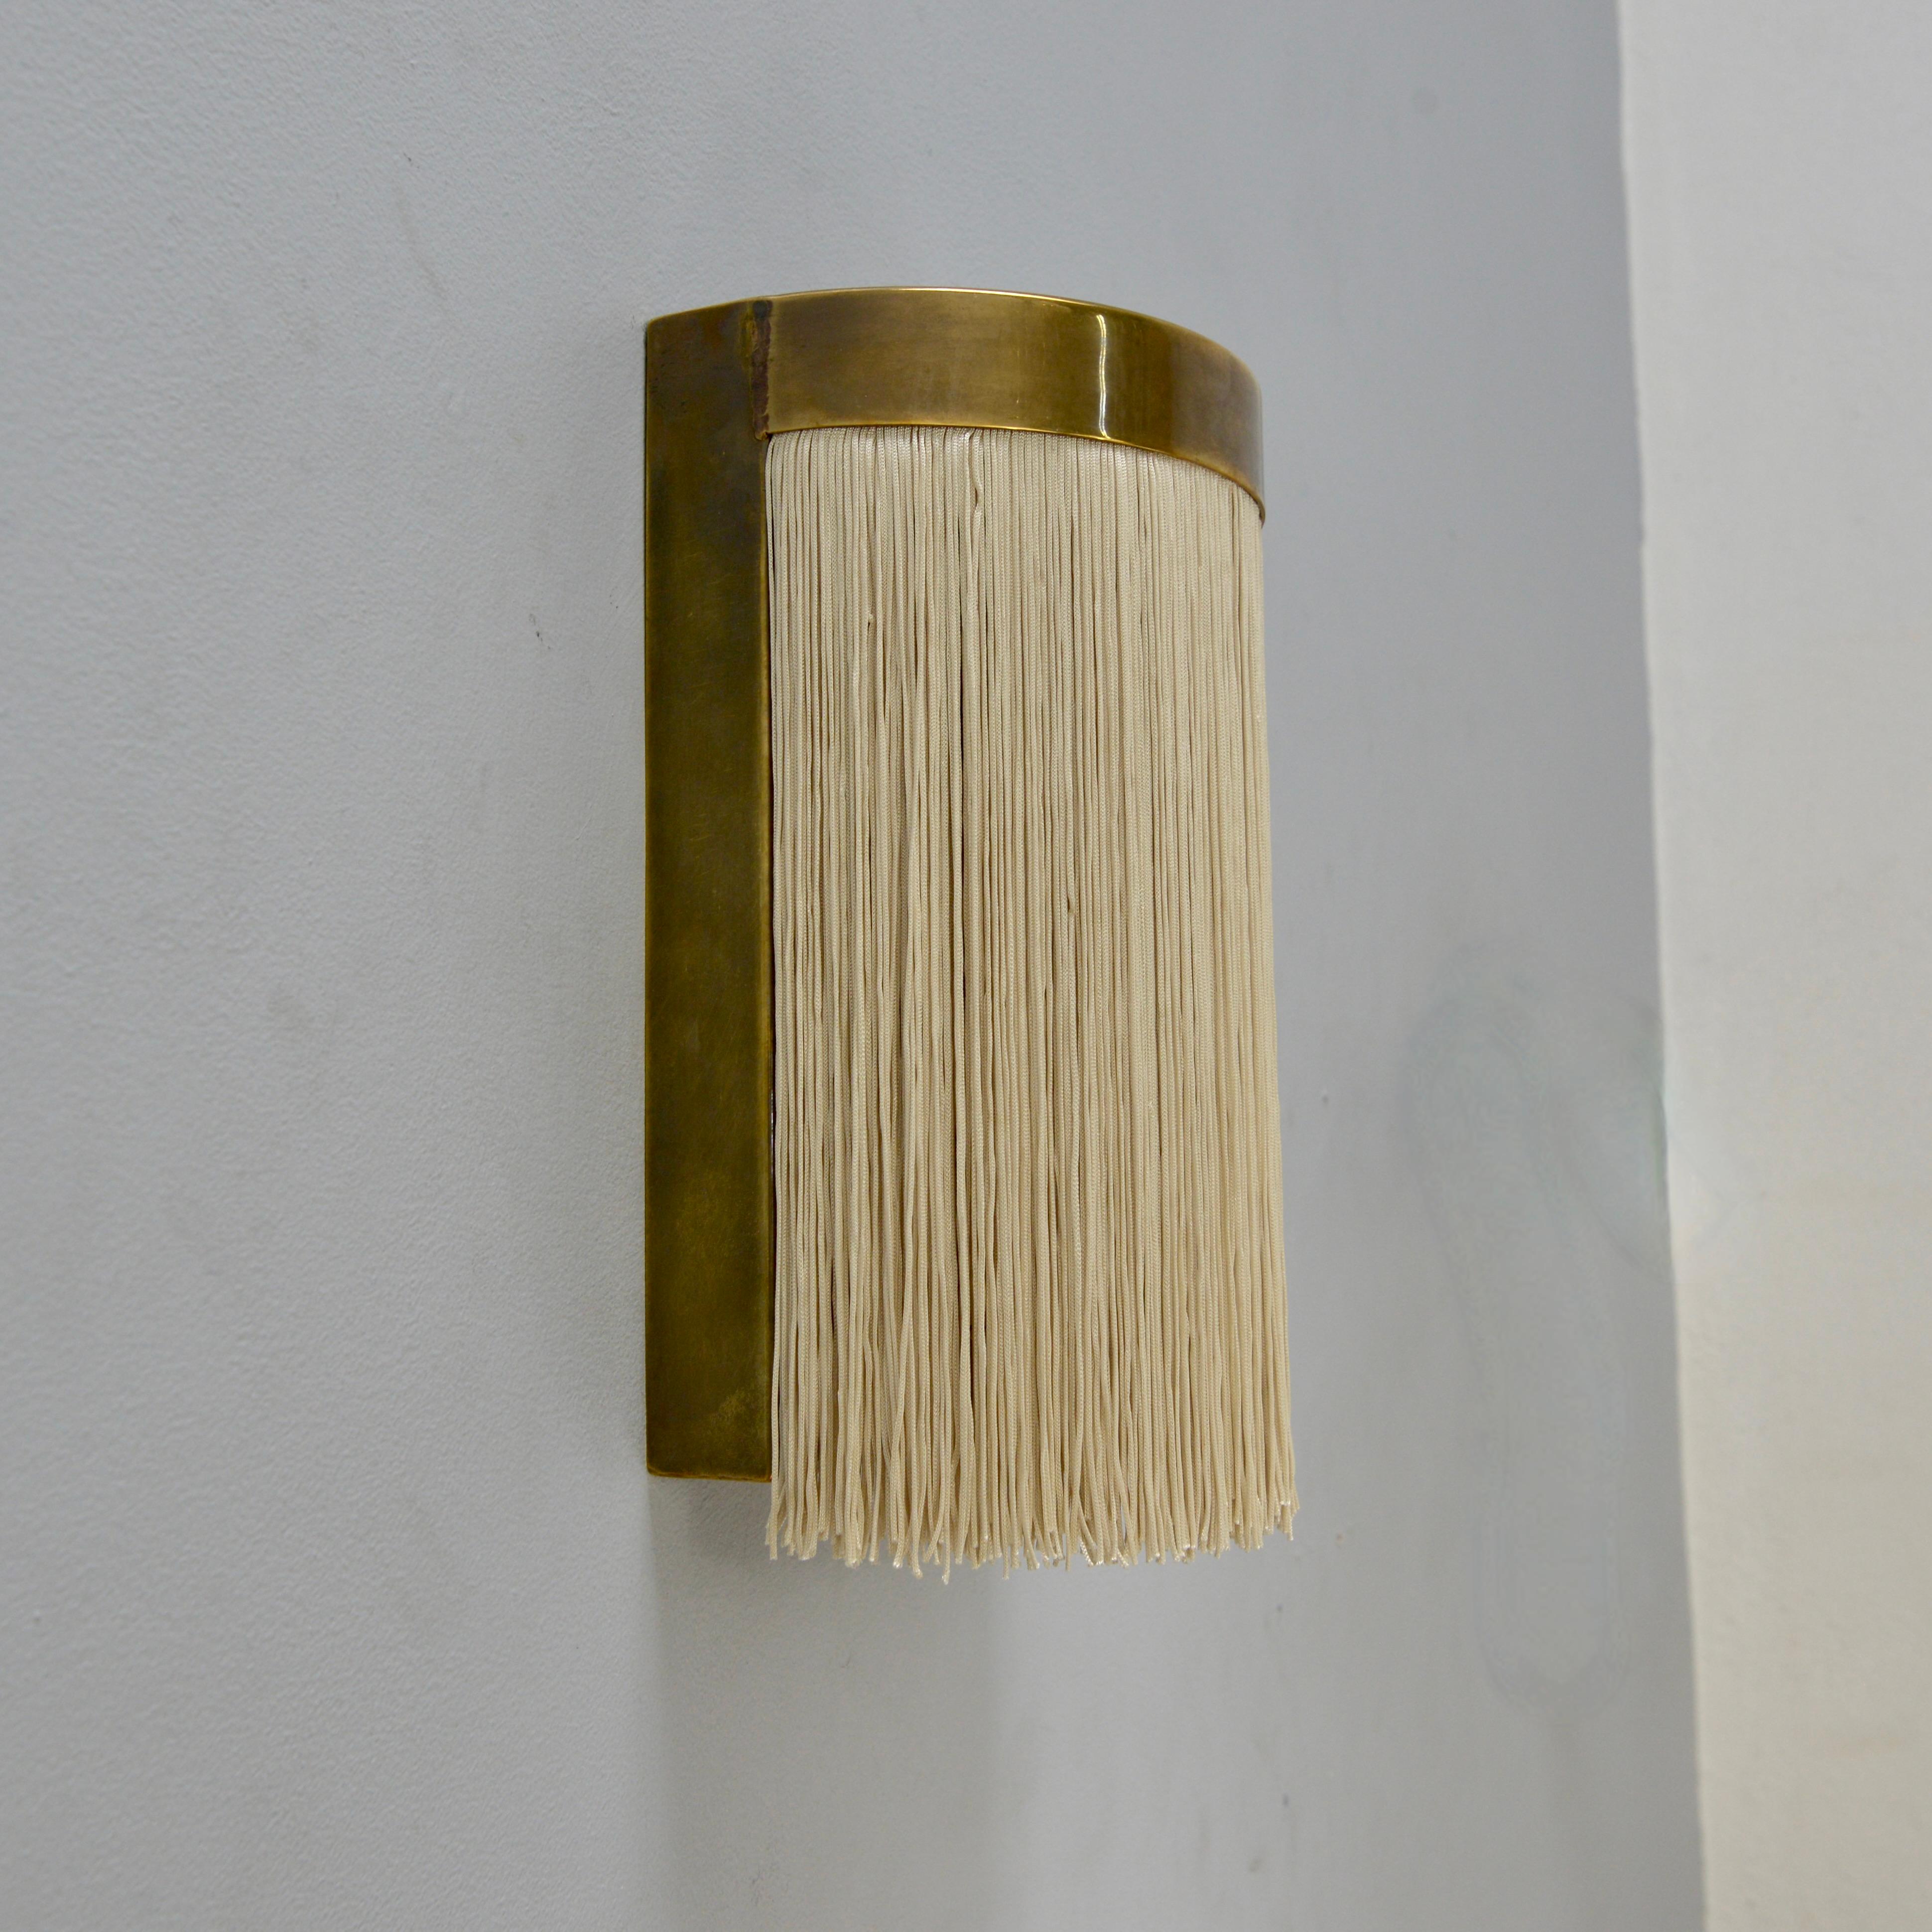 The fantastic LUMfk Sconce is a patinated brass and champagne toned fringe wall sconce inspired by mid century Italian design. This sconce is created by Lumfardo Luminaires and made contemporary in the US. Multiples available for order. Can be wired